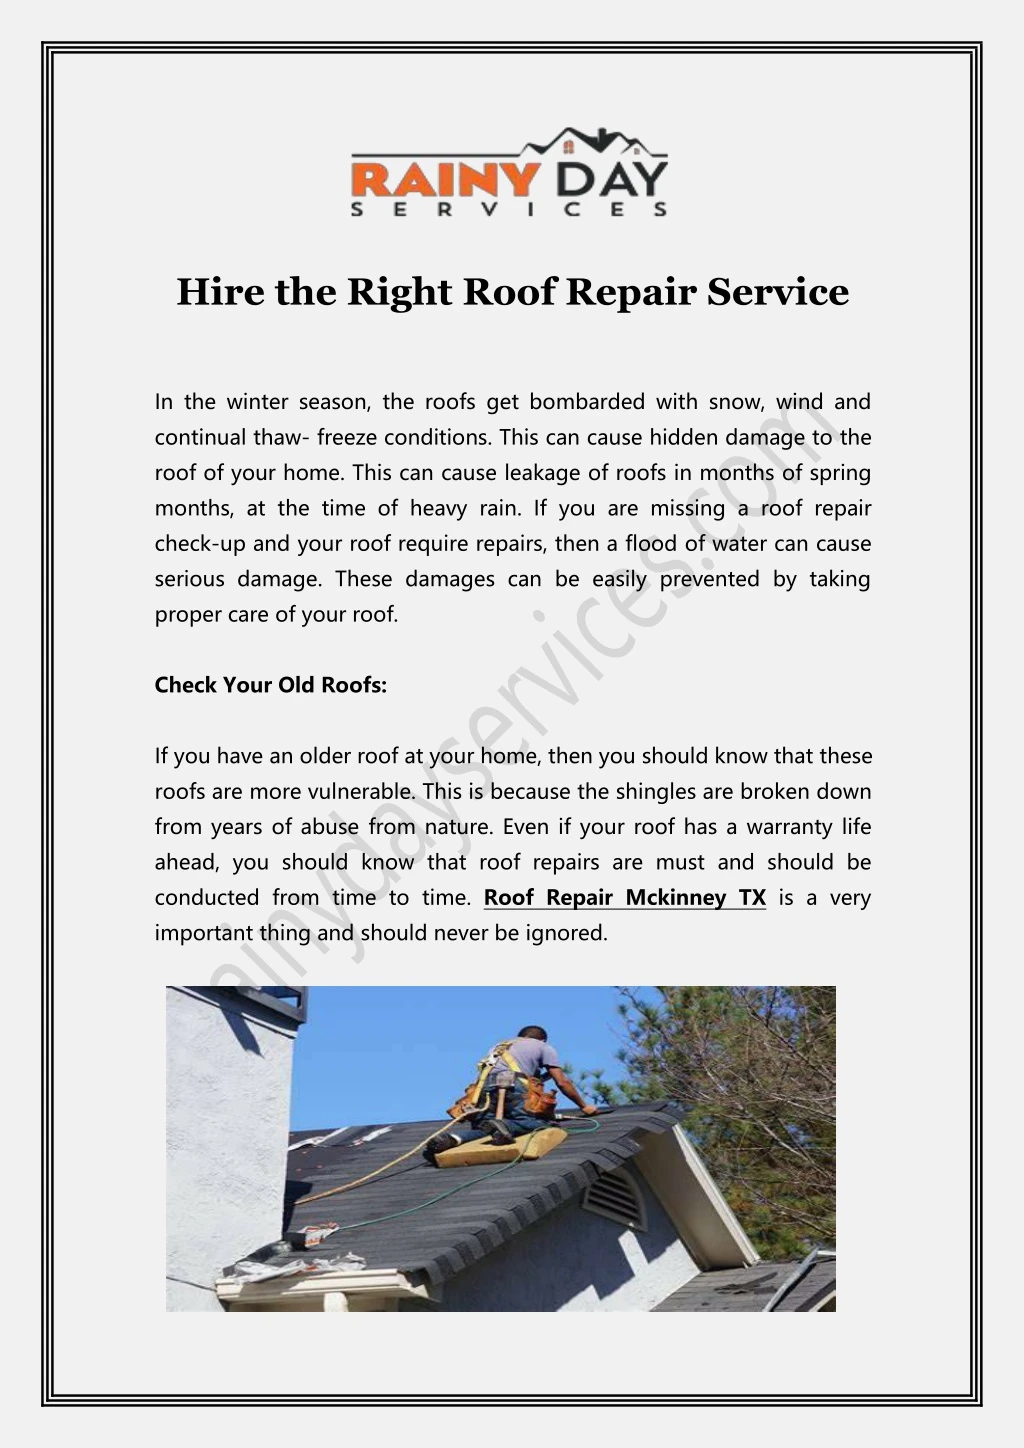 hire the right roof repair service